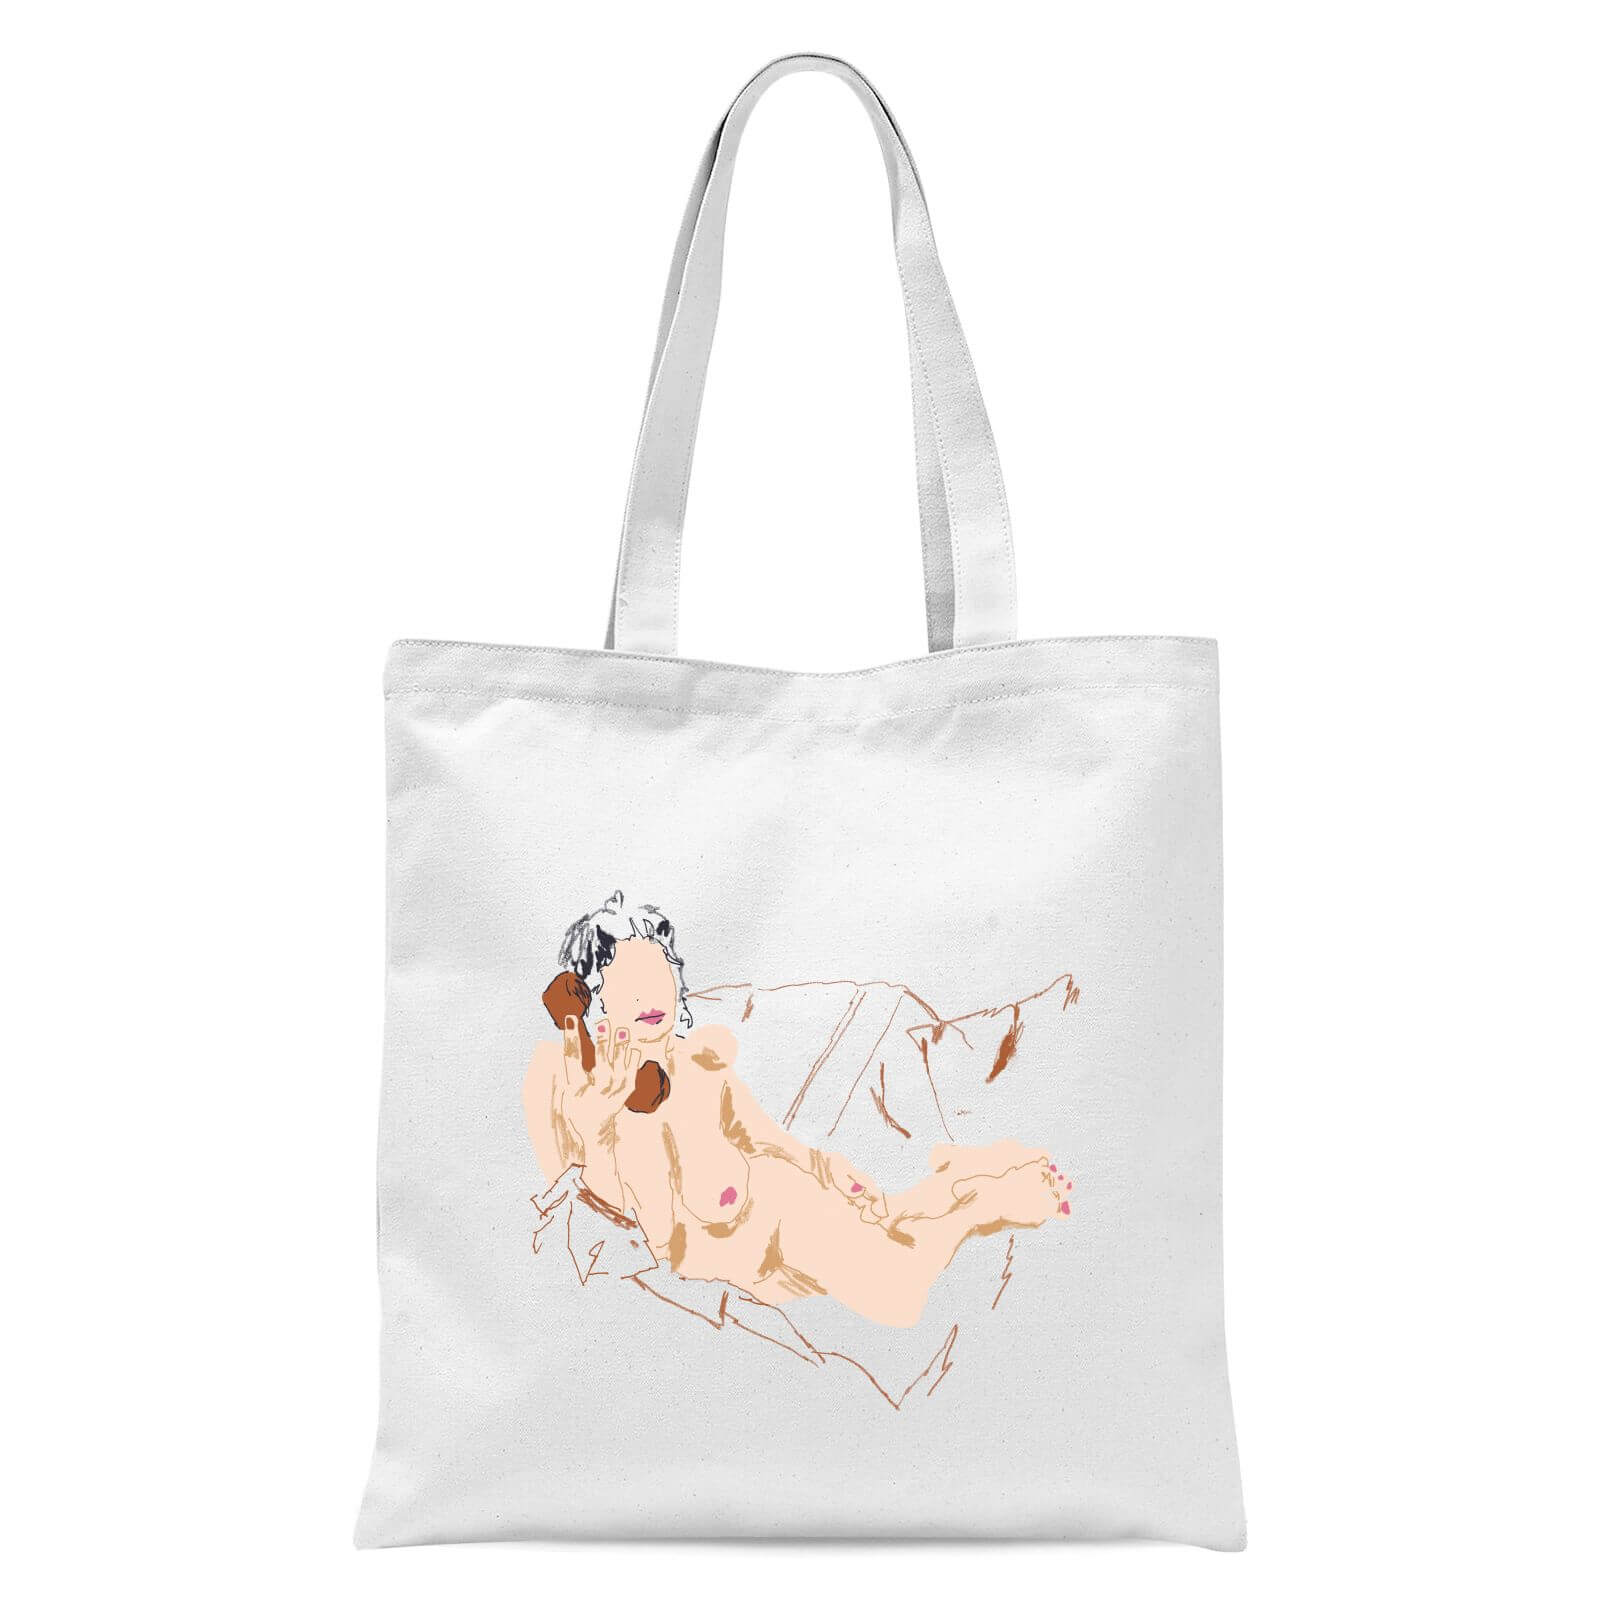 Girl On The Phone Tote Bag - White